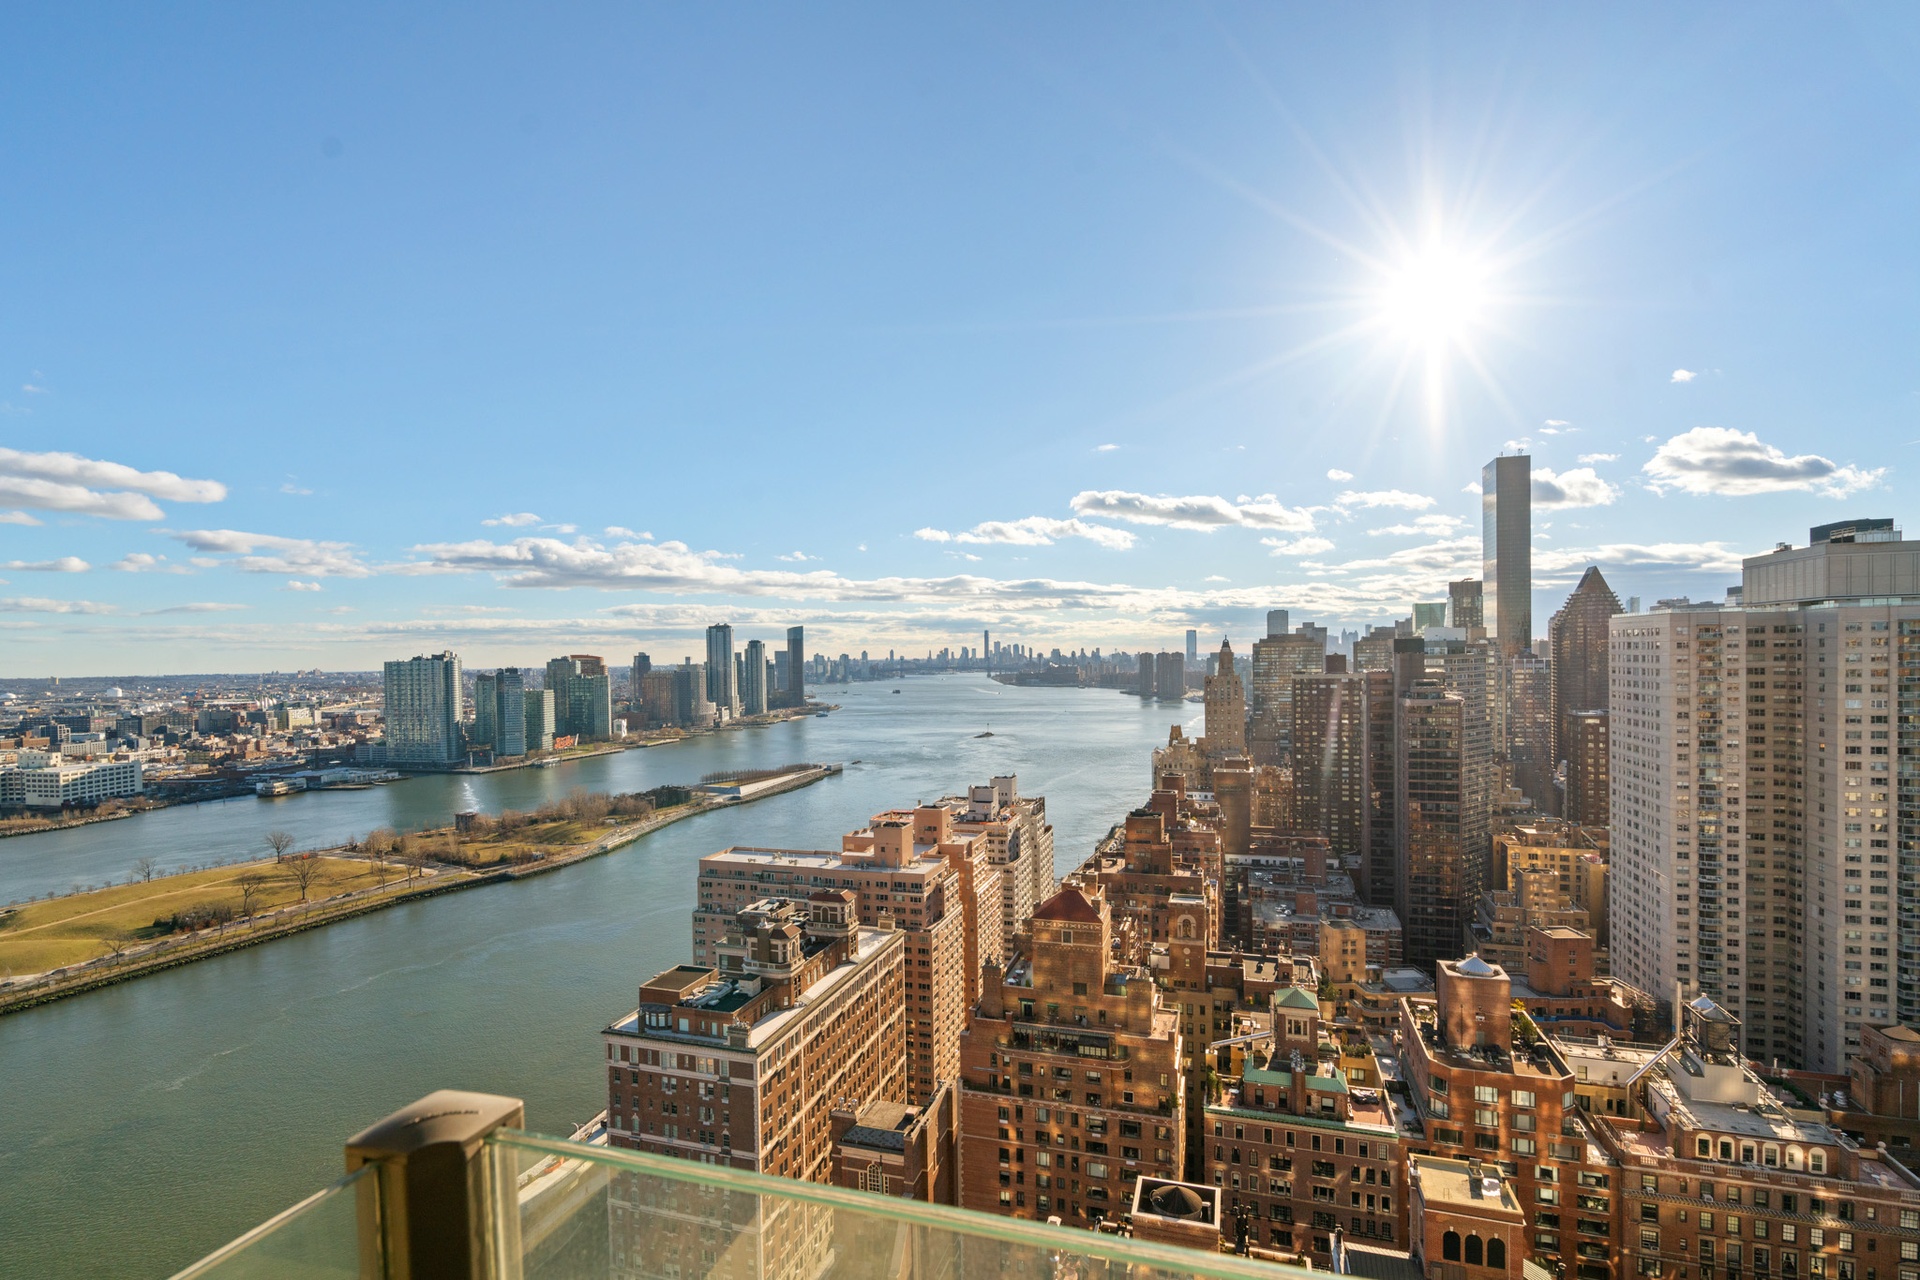 425 East 58th Street 36-H, Sutton Place, Midtown East, NYC - 4 Bedrooms  
4.5 Bathrooms  
7 Rooms - 